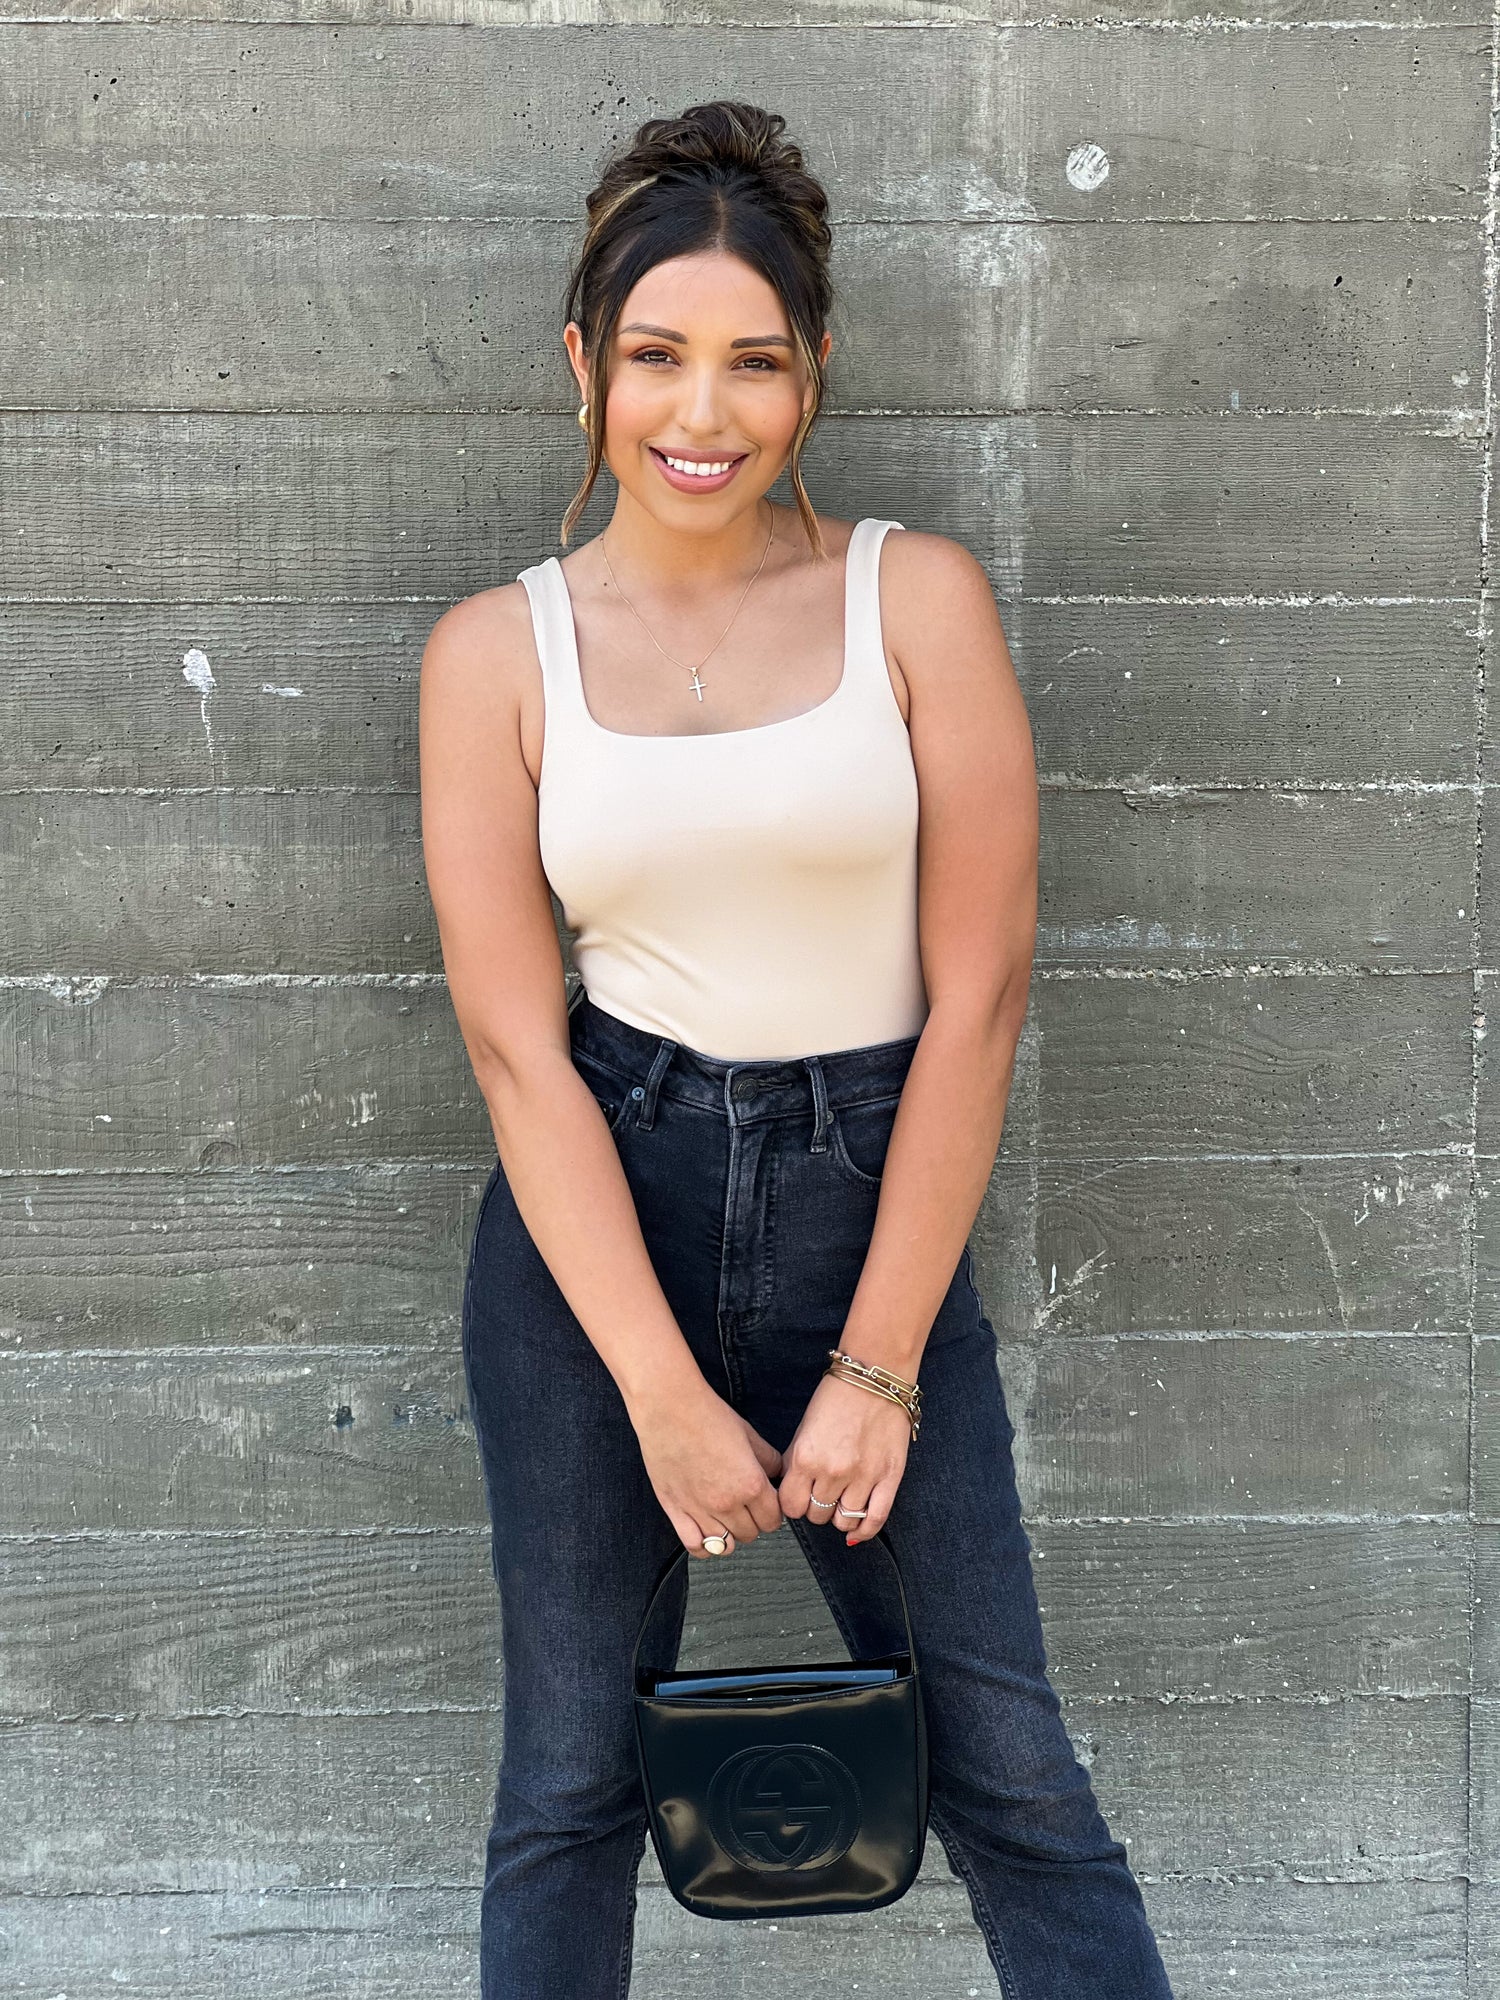 A brown skinned latina girl wearing a nude bodysuit with black jeans. She has her hair up in a messy bun and two front hairs in front of her face. She accessorized the look with a black leather gucci bag and gold hoop earrings and a gold cross necklace. She is posing with both arms facing toward her holding the bag.